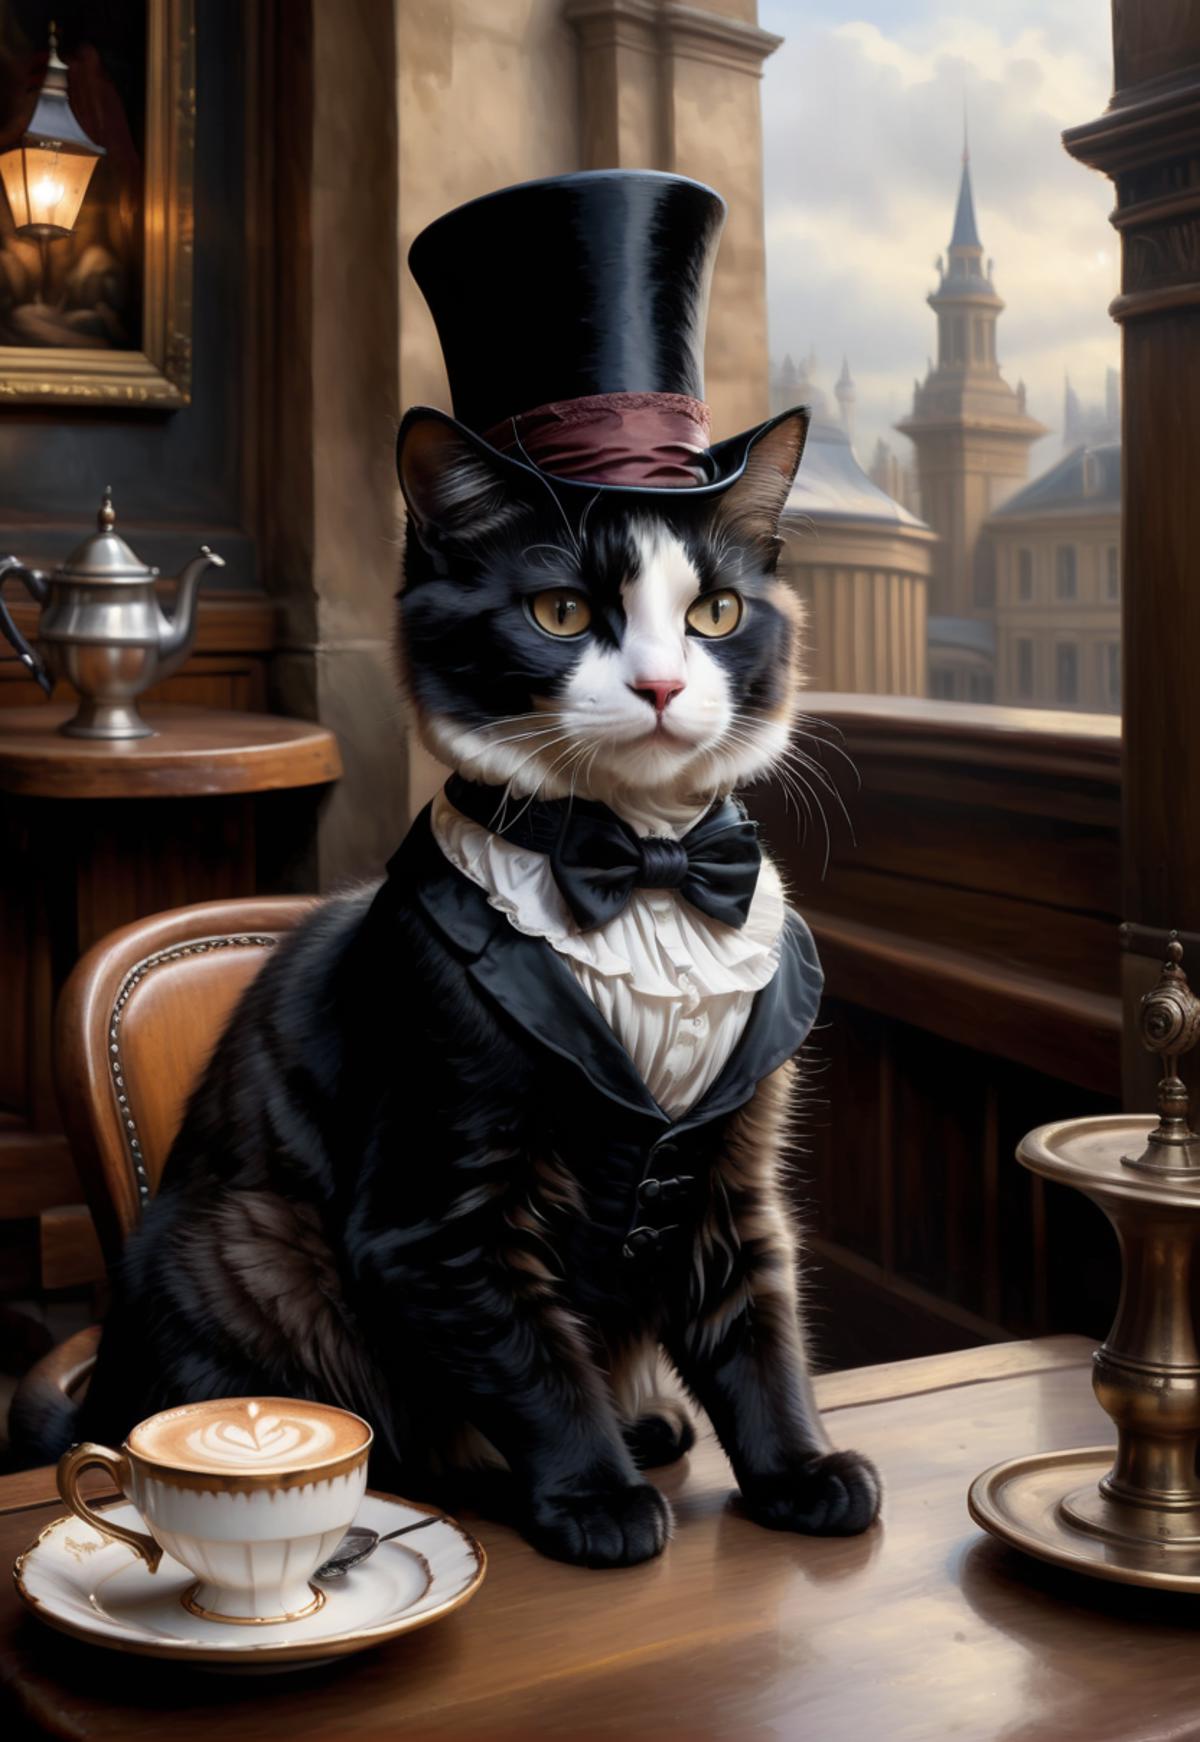 A cat in a top hat and bow tie sitting on a chair.